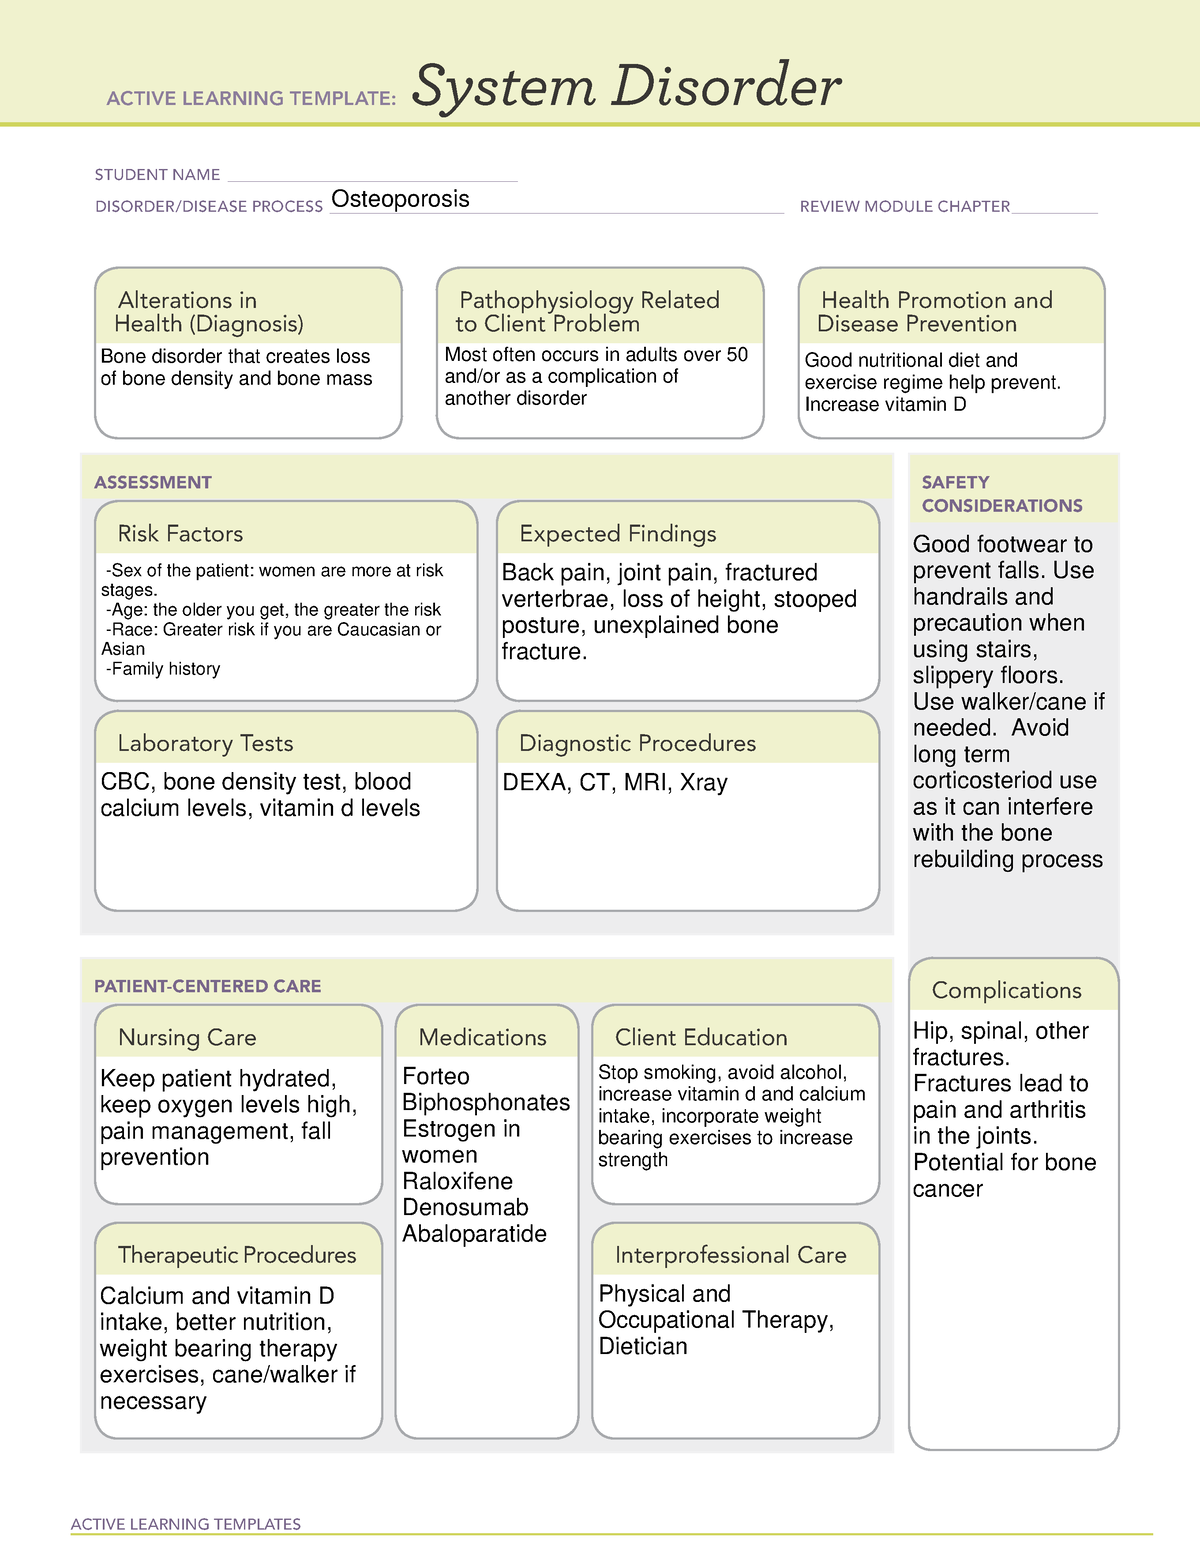 System Disorder Template Osteoporosis - ACTIVE LEARNING TEMPLATES ...